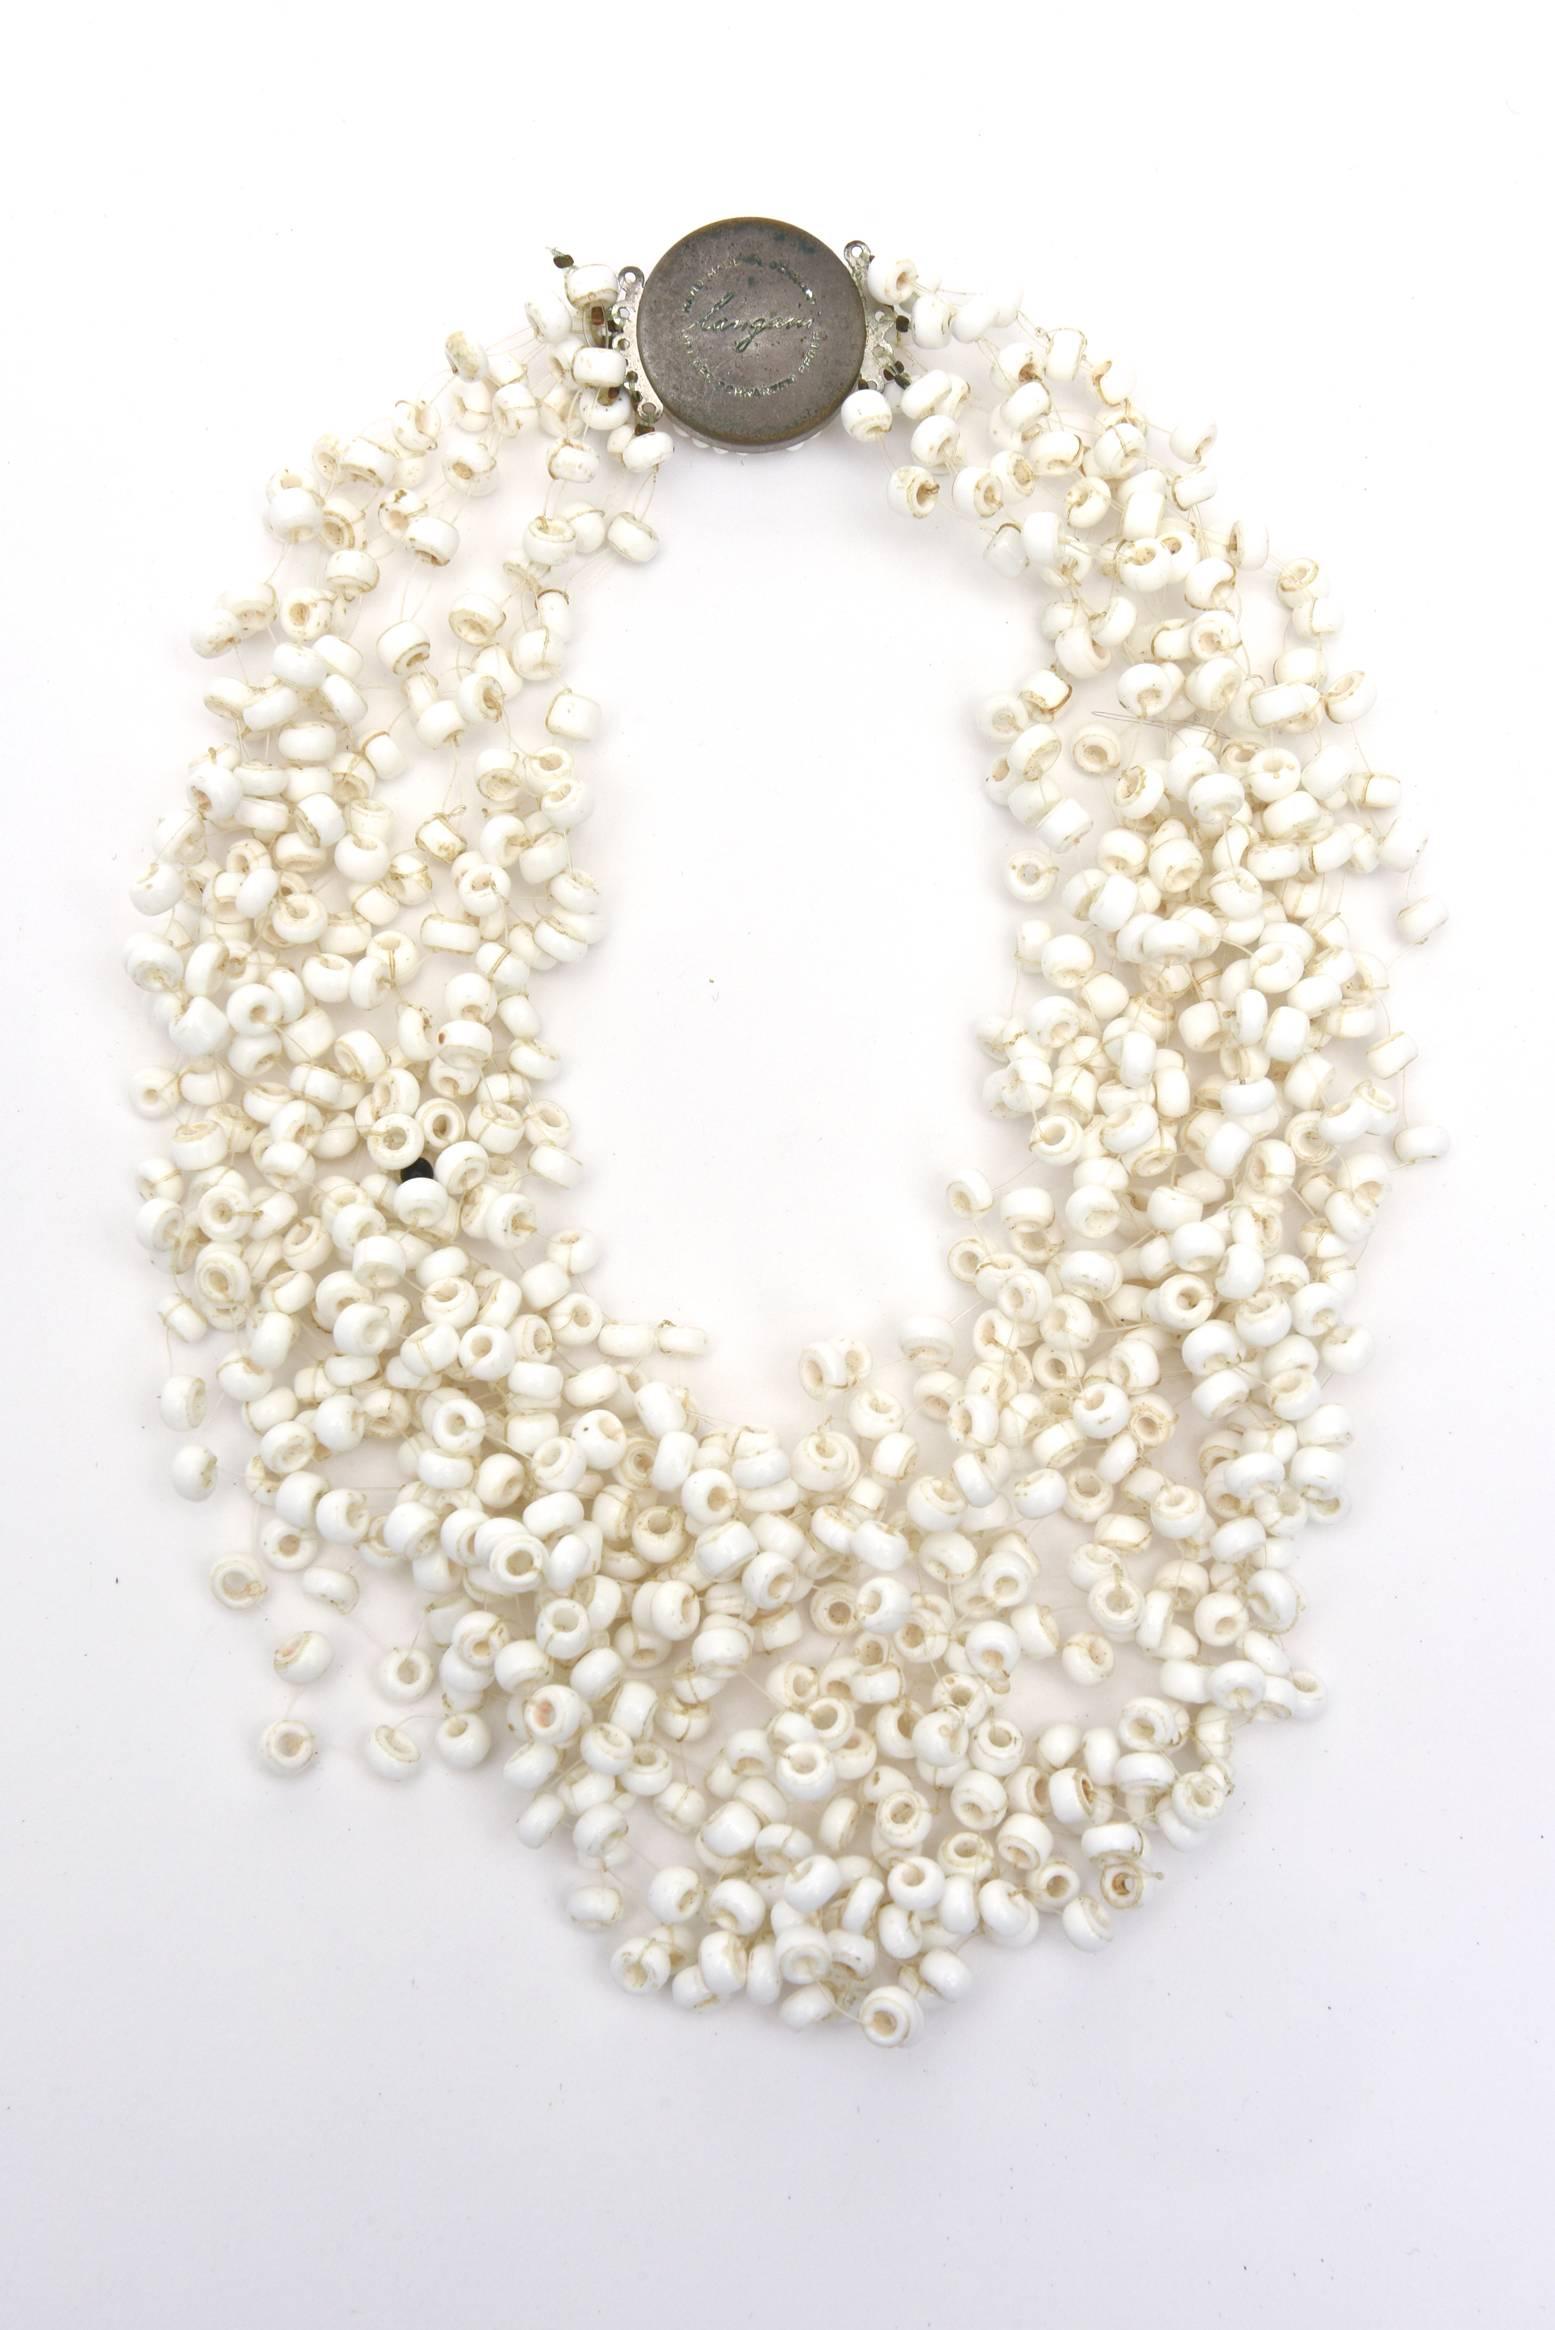 This wonderful and collectable vintage white multi strand signed Langani necklace designed by Anna Lang of Germany has a clean, airy and great sculptural presence. Almost as if it is floating on the neck. It is perfect now for for all seasons and